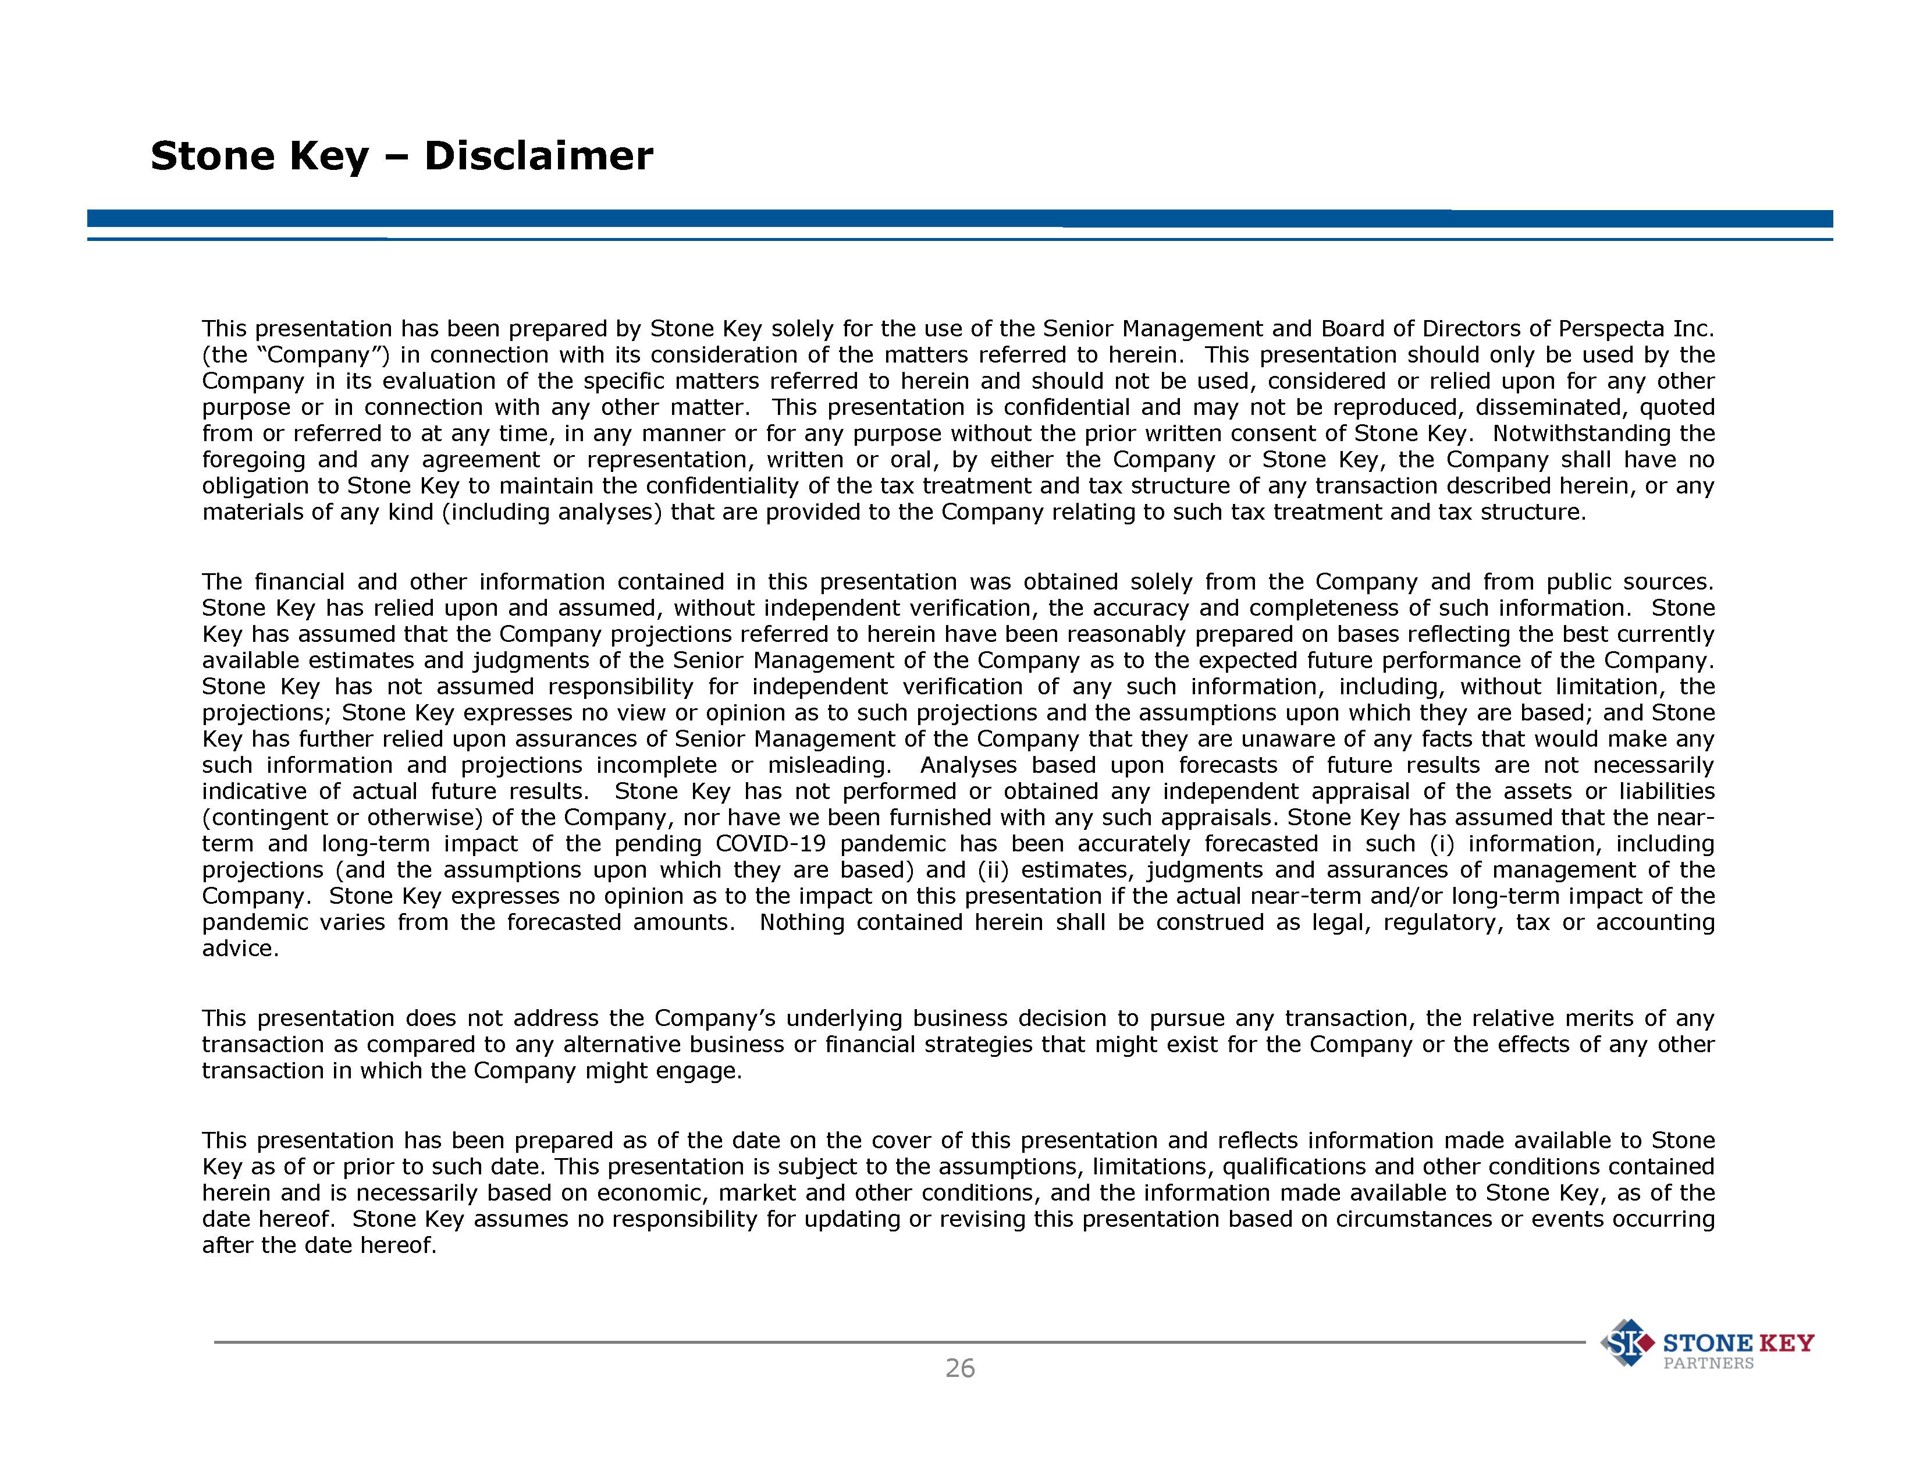 stone key disclaimer this presentation has been prepared by stone key solely for the use of the senior management and board of directors of the company in connection with its consideration of the matters referred to herein this presentation should only be used by the its evaluation of the specific matters referred to herein and should not be used considered or relied upon for any other company in this presentation is confidential and may not be reproduced disseminated quoted purpose or in connection with any other matter from or referred to at any time in any manner or for any purpose without the prior written consent of stone key notwithstanding the foregoing and any agreement or representation written or oral by either the company or stone key the company shall have no obligation to stone key to maintain the confidentiality of the tax treatment and tax structure of any transaction described herein or any materials of any kind including analyses that are provided to the company relating to such tax treatment and tax structure the financial and other information contained in this presentation was obtained solely from the company and from public sources stone stone key has relied upon and assumed without independent verification the accuracy and completeness of such information key has assumed that the company projections referred to herein have been reasonably prepared on bases reflecting the best currently available estimates and judgments of the senior management of the company as to the expected future performance of the company stone key has not assumed responsibility for independent verification of any such information including without limitation the projections stone key expresses no view or opinion as to such projections and the assumptions upon which they are based and stone key has further relied upon assurances of senior management of the company that they are unaware of any facts that would make any analyses based upon forecasts of future results are not necessarily such information and projections incomplete or misleading stone key has not performed or obtained any independent appraisal of the assets or liabilities indicative of actual future results contingent or otherwise of the company nor have we been furnished with any such appraisals stone key has assumed that the near term and long term impact of the pending covid pandemic has been accurately forecasted in such i information including projections and the assumptions upon which they are based and estimates judgments and assurances of management of the company stone key expresses no opinion as to the impact on this presentation if the actual near term and or long term impact of the nothing contained herein shall be construed as legal regulatory tax or accounting pandemic varies from the forecasted amounts advice this presentation does not address the company underlying business decision to pursue any transaction the relative merits of any transaction as compared to any alternative business or financial strategies that might exist for the company or the effects of any other transaction in which the company might engage this presentation has been prepared as of the date on the cover of this presentation and reflects information made available to stone key as of or prior to such date this presentation is subject to the assumptions limitations qualifications and other conditions contained herein and is necessarily based on economic market and other conditions and the information made available to stone key as of the date hereof stone key assumes no responsibility for updating or revising this presentation based on circumstances or events occurring after the date hereof stone key partner | Goldman Sachs